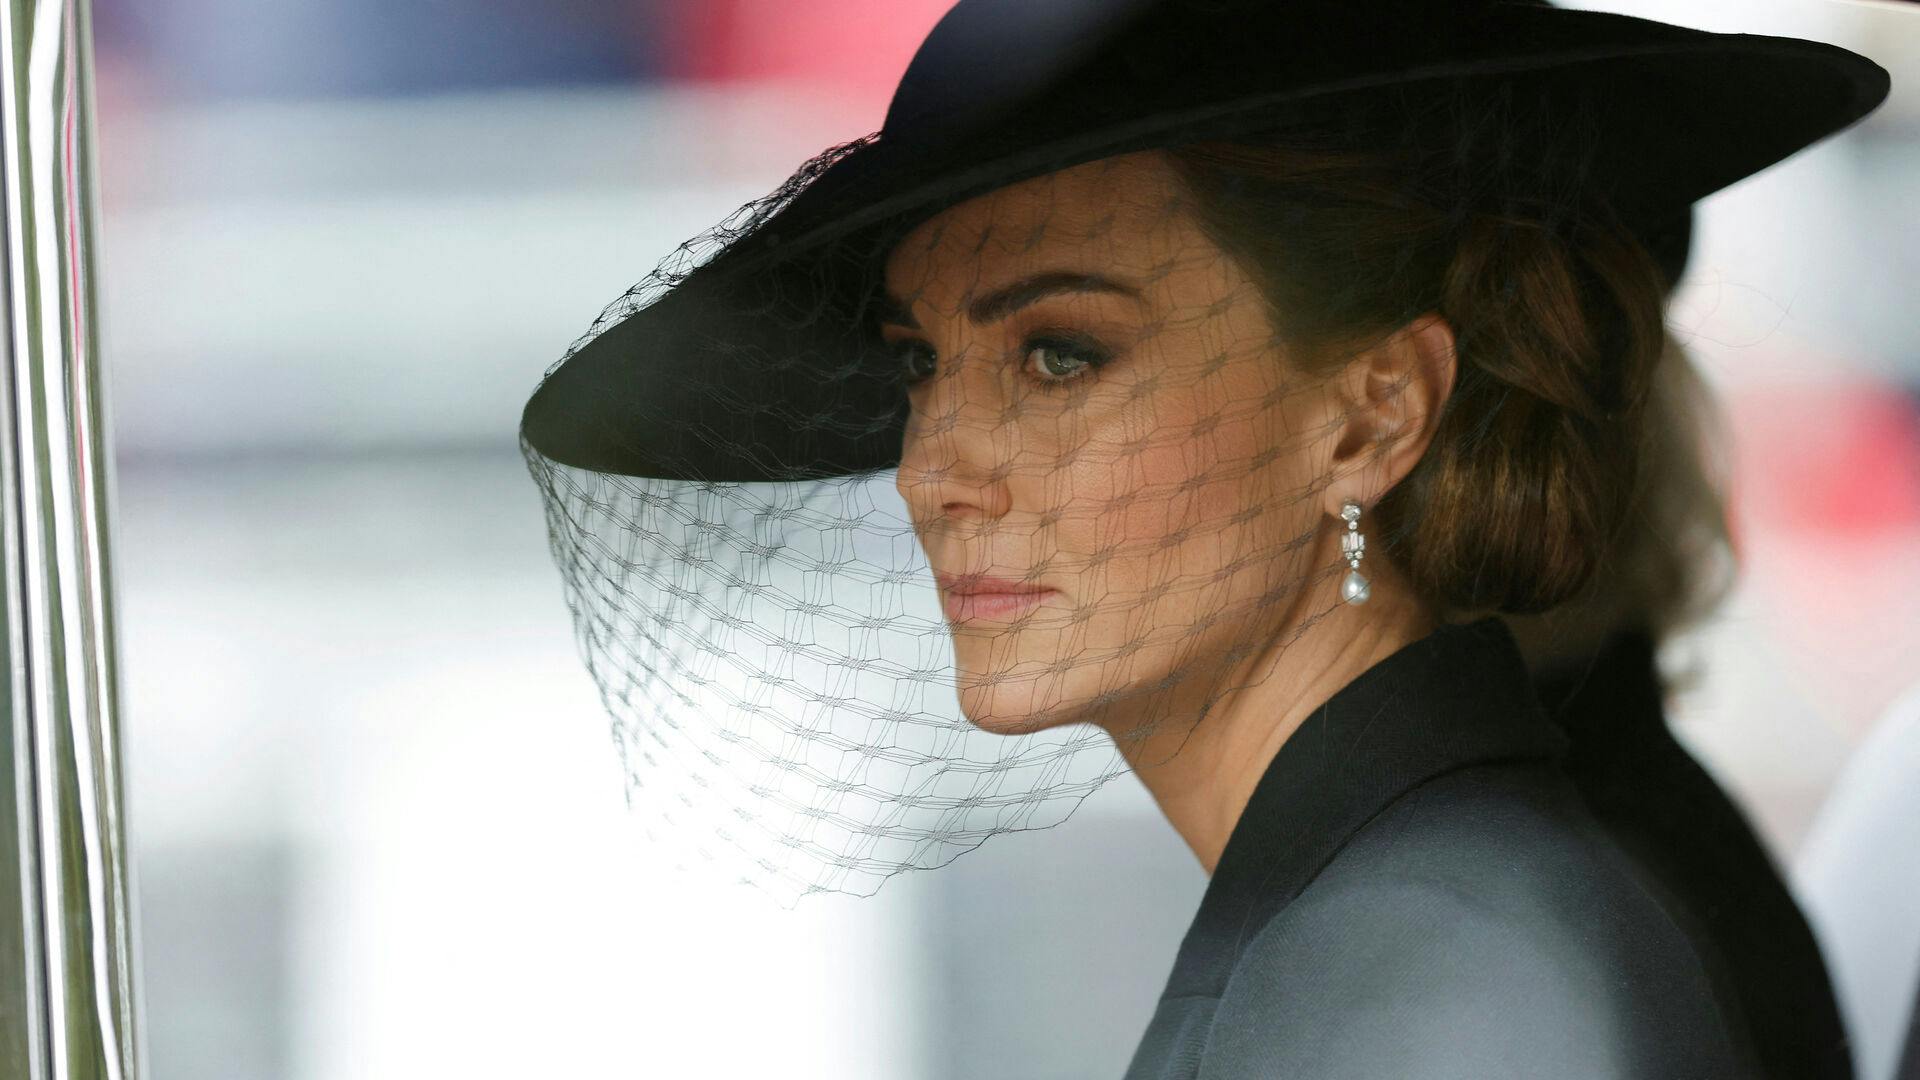 Kate Middleton, Princess of Wales, is driven down The Mall after the funeral for HM Queen Elizabeth II's funeral in London, United Kingdom. 19 September 2022. Tom Jenkins/Pool via REUTERS